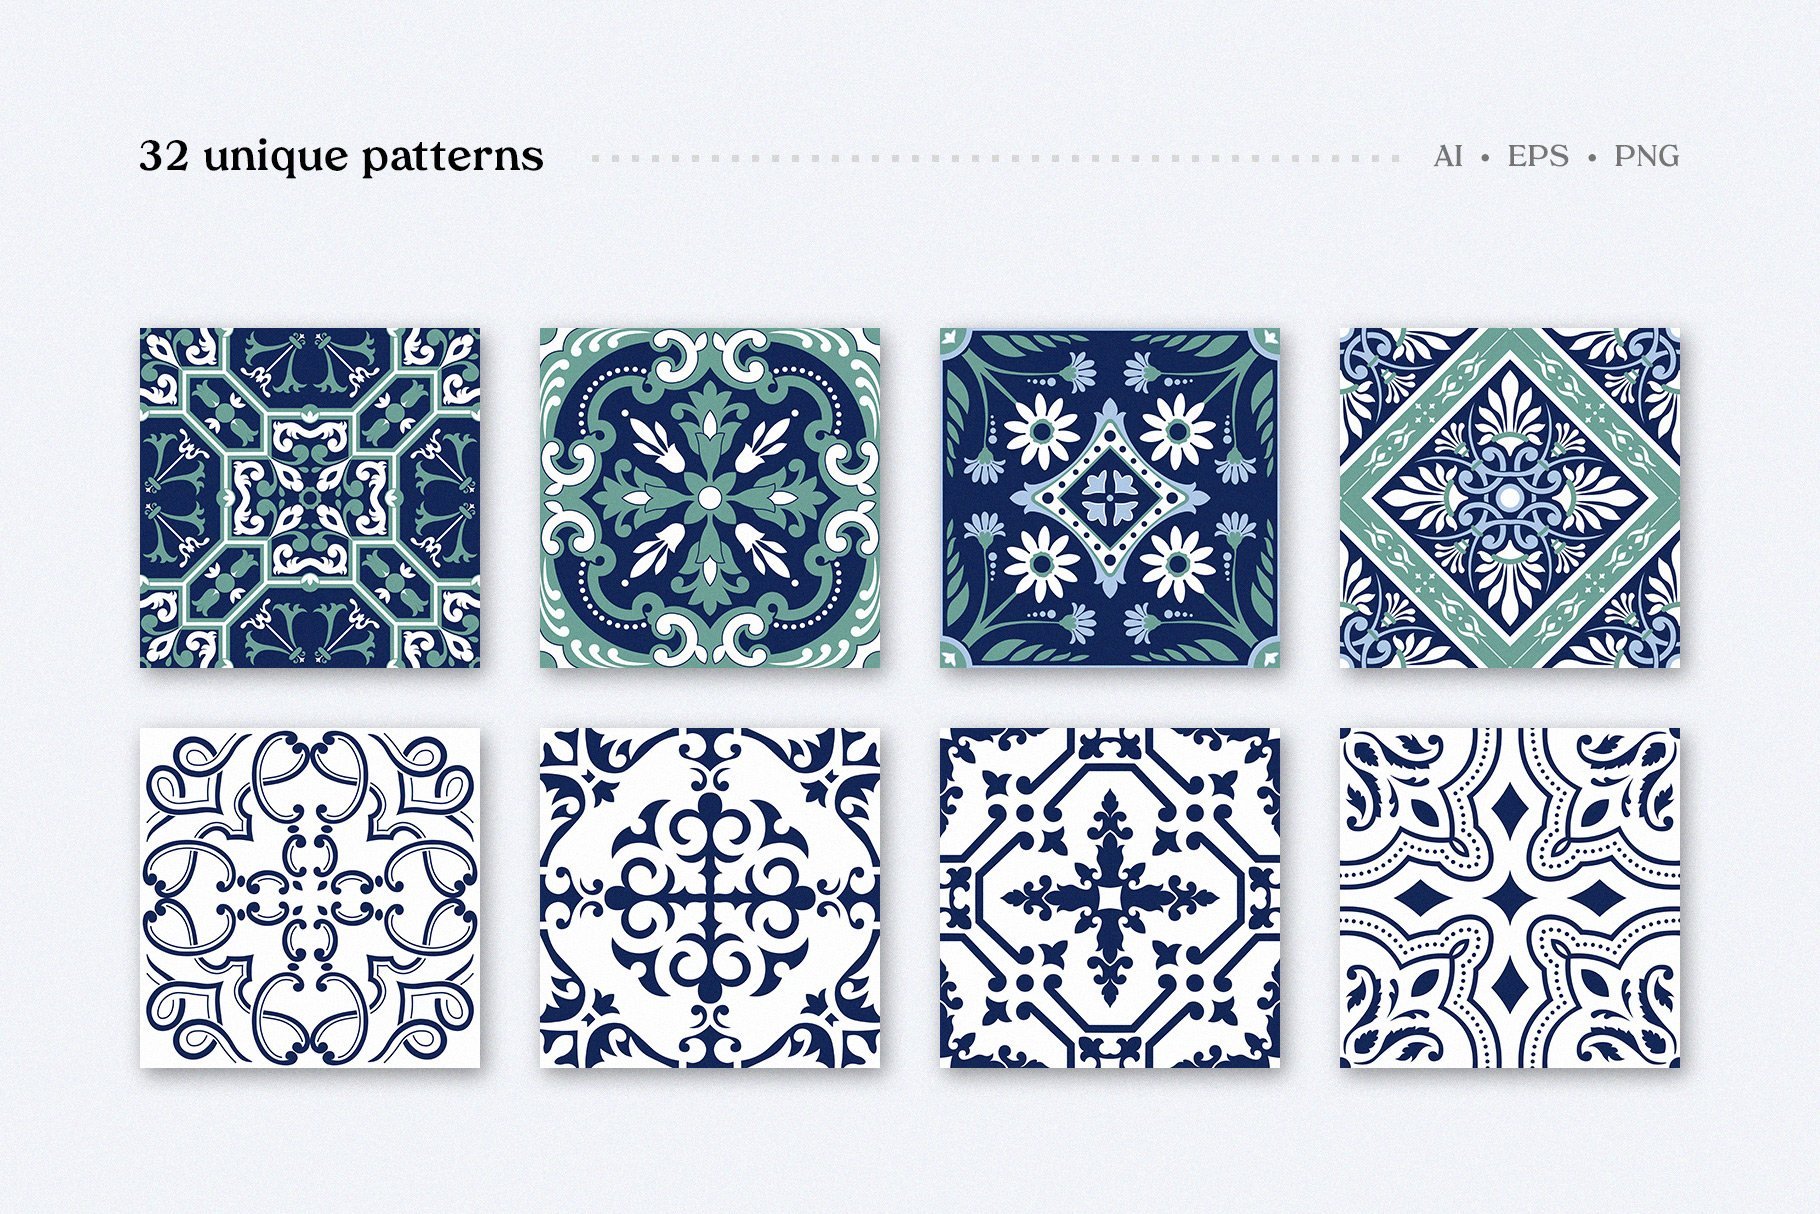 Moroccan Patterns and Ornaments